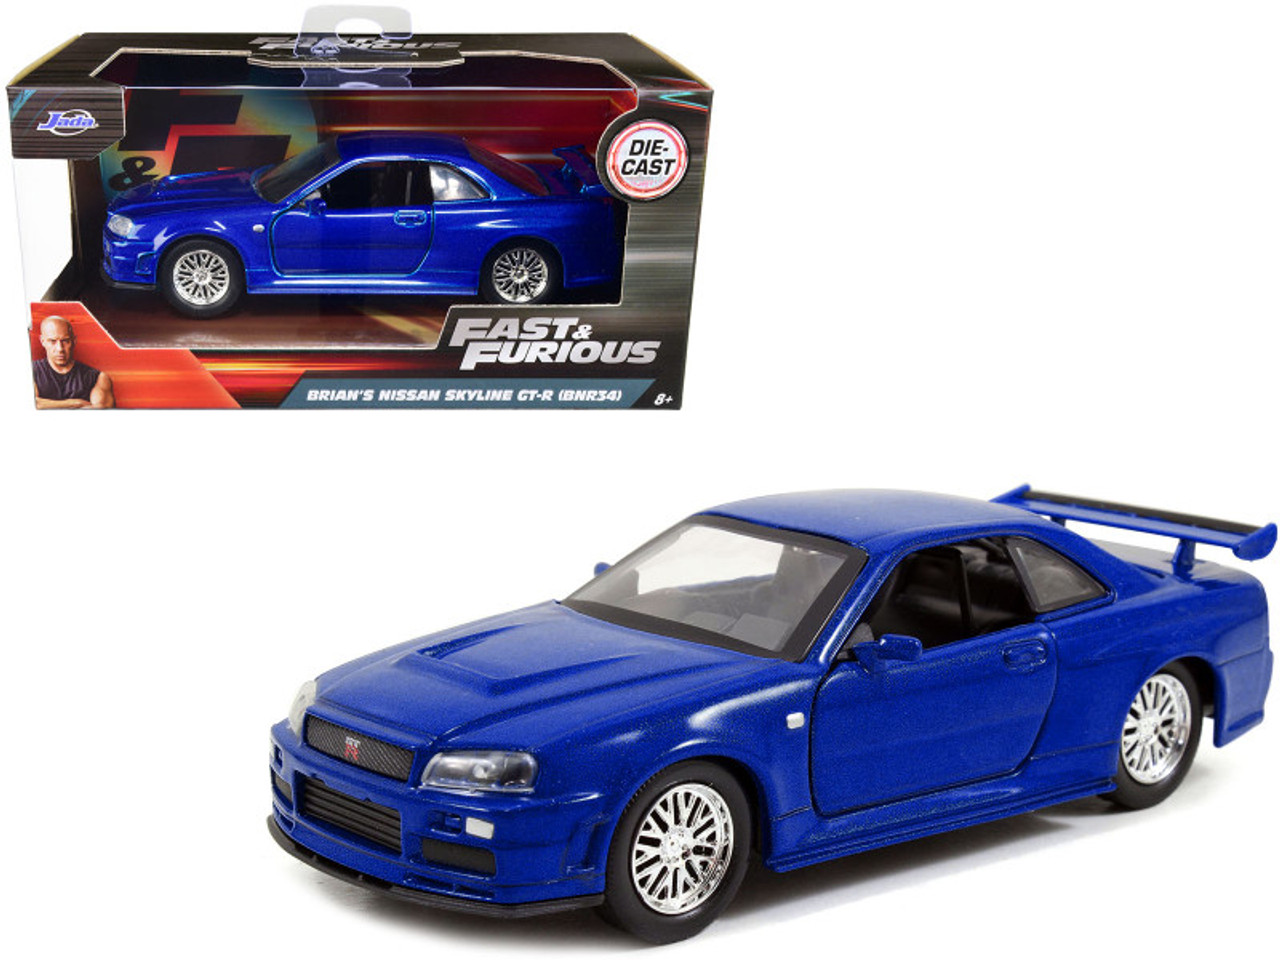 JADA TOYS FAST AND FURIOUS.. COLLECTION DIECAST CARS 1:32 YOU PICK NEW